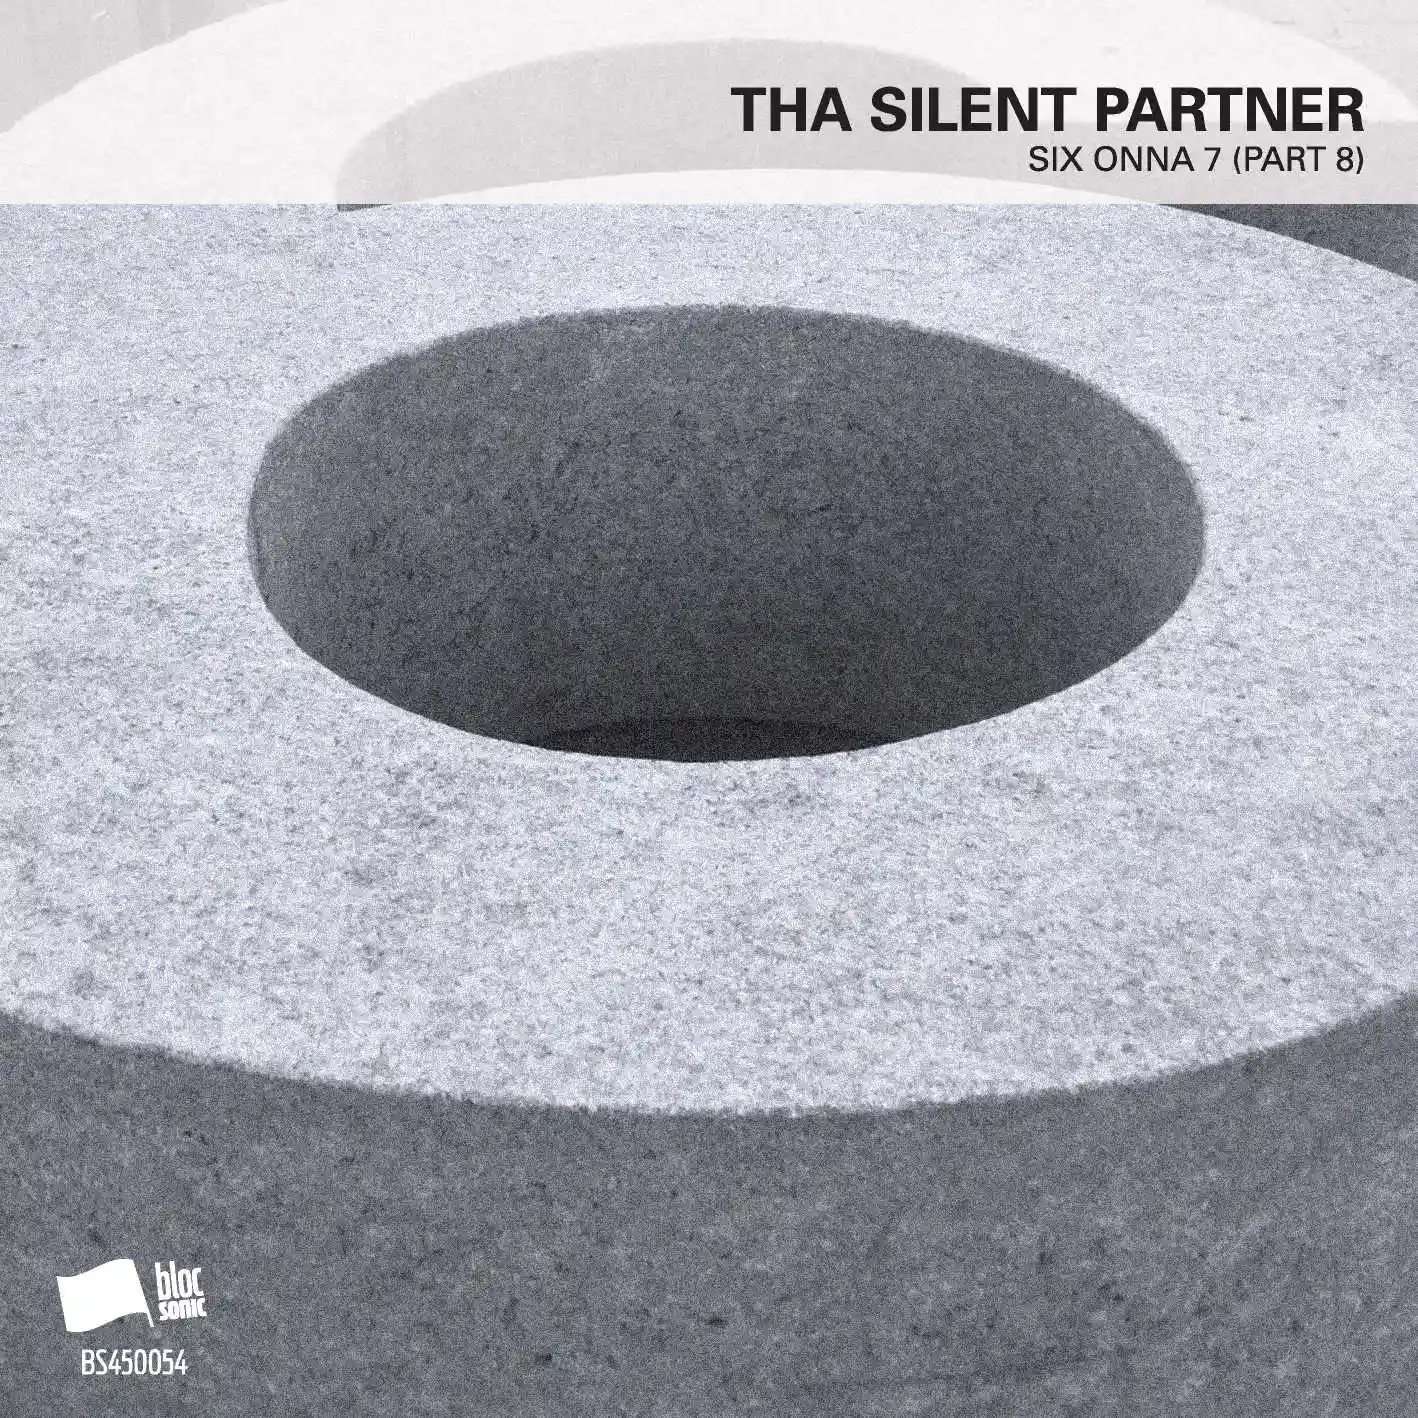 Album cover for “SIX ONNA 7 (Part 8)” by Tha Silent Partner